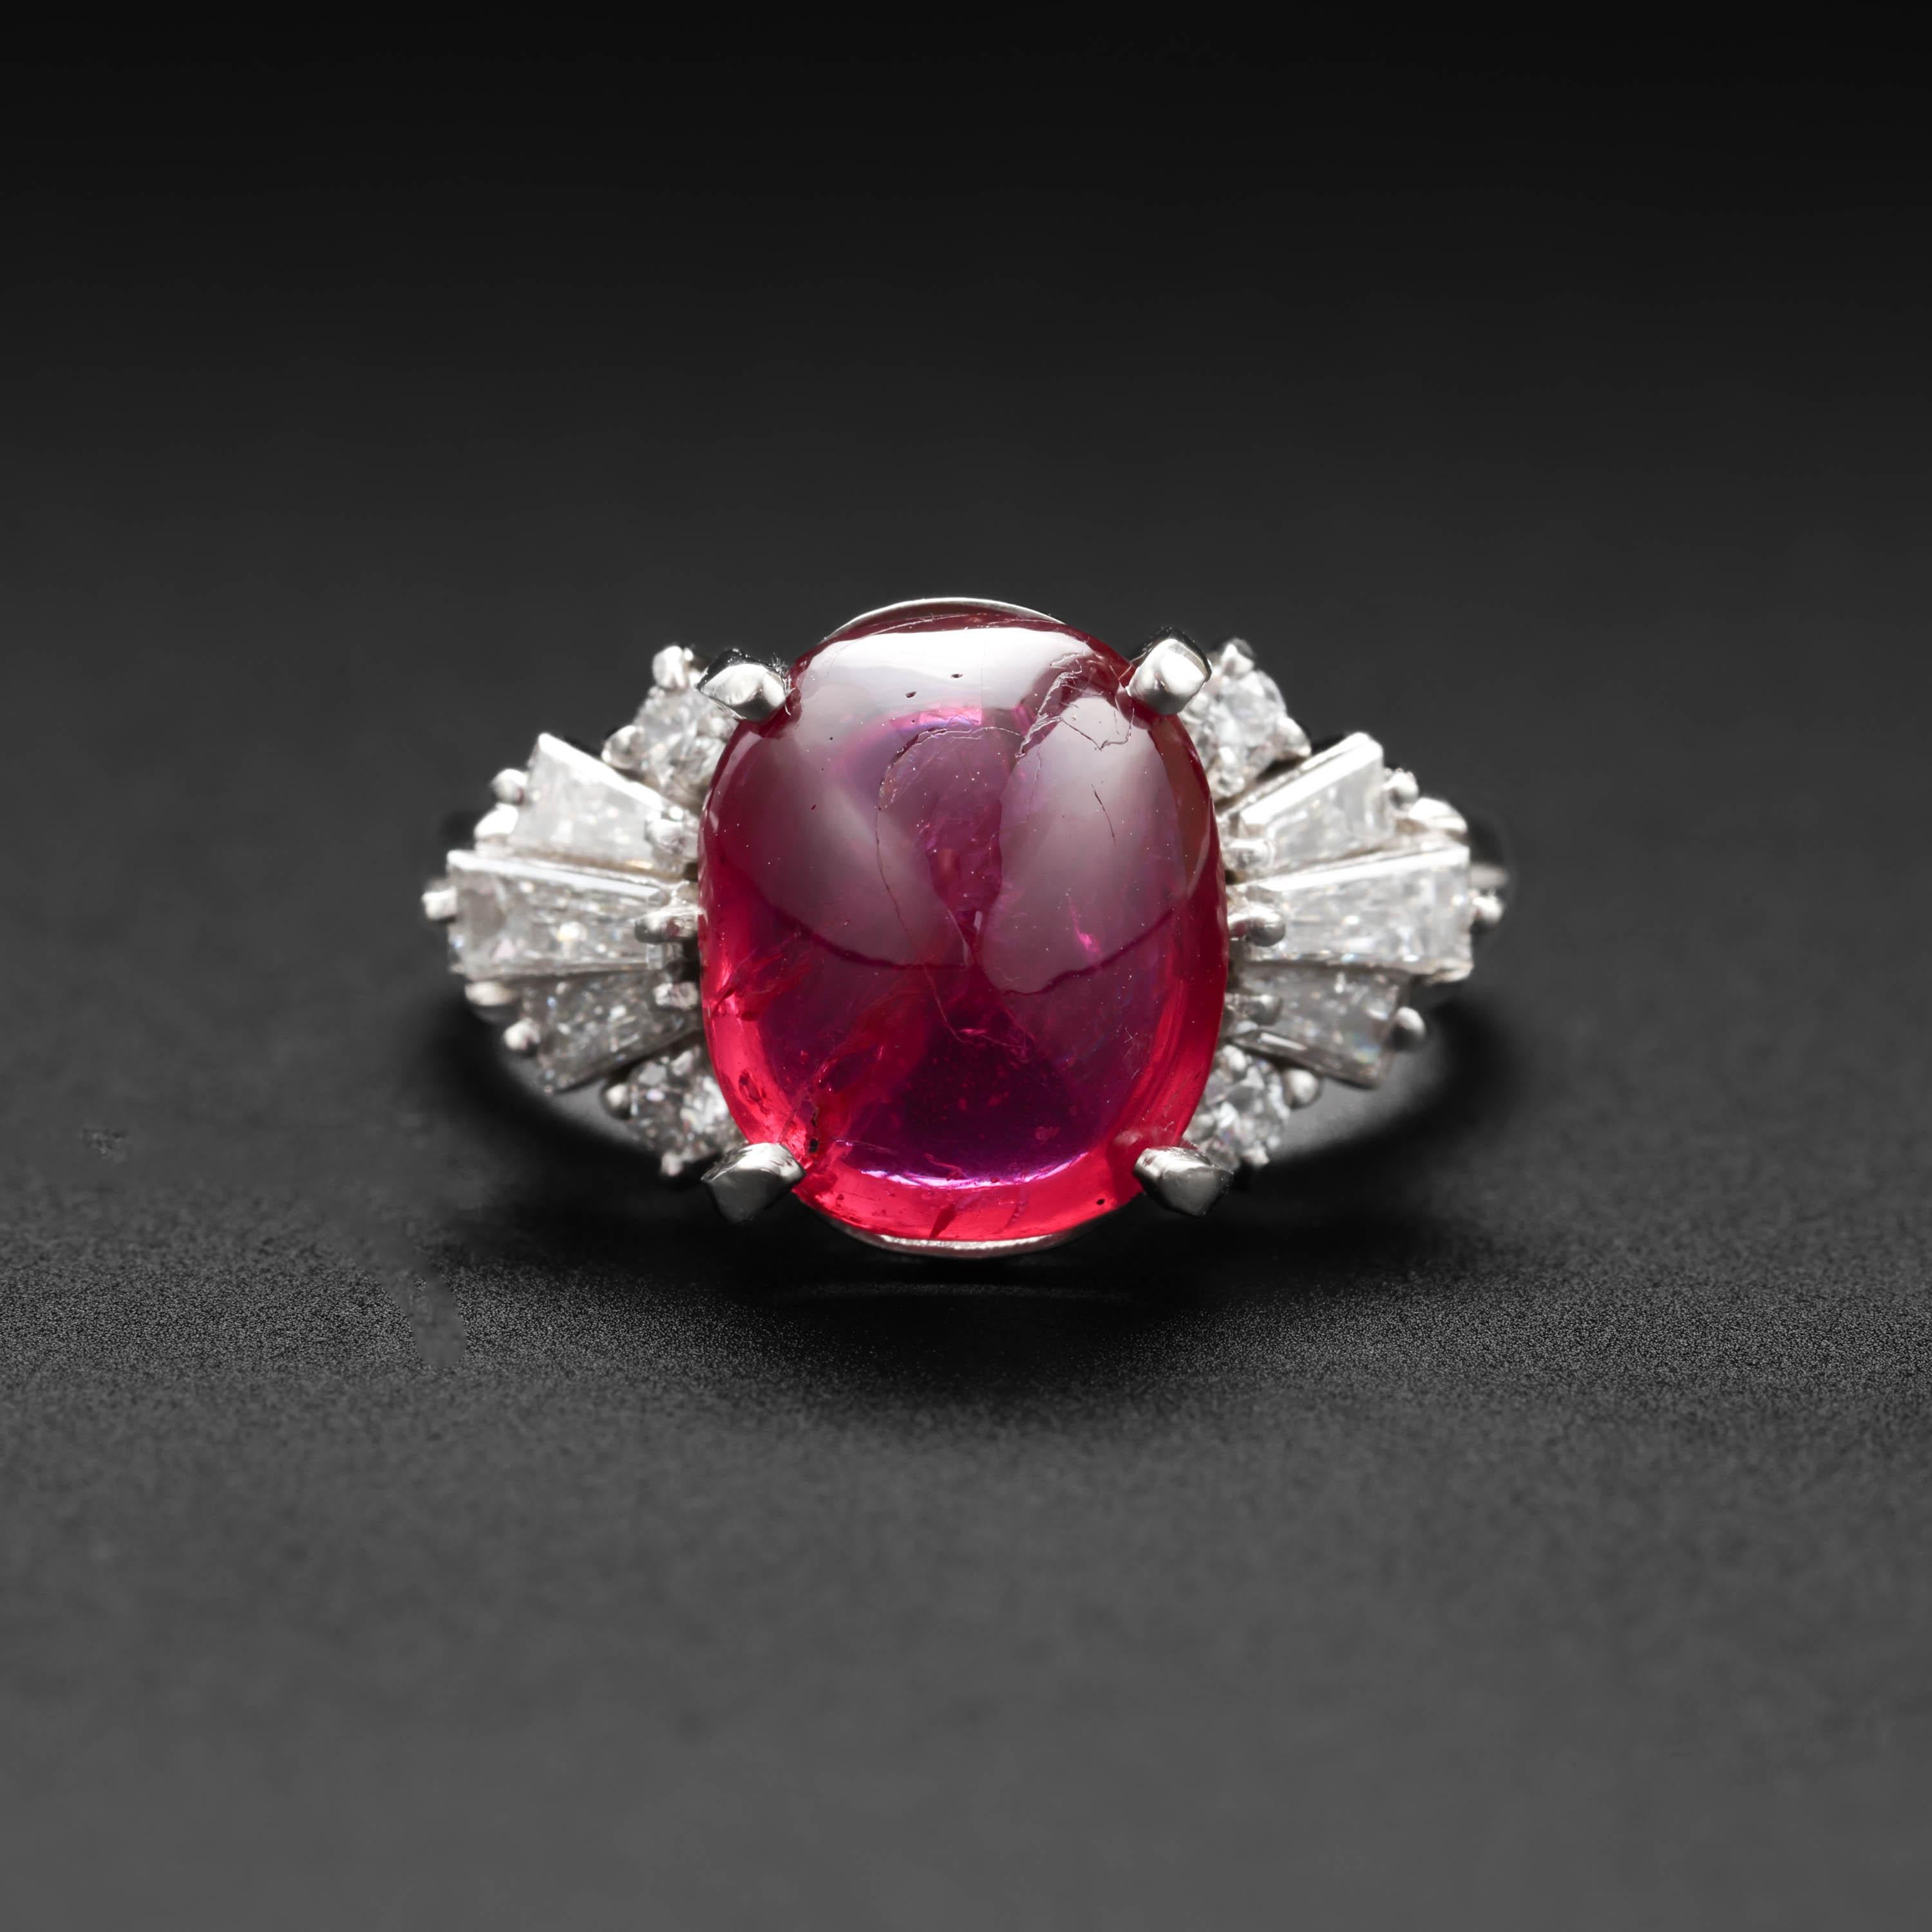 An enormous, spectacular four-carat cabochon-cut vivid pinkish-red no-heat Burma ruby commands attention in this extraordinary platinum Mid-century ring. The stoplight-red ruby measures 10.33mm x 8.74mm x 4.84mm and weighs 4.75 carats. Three sleek